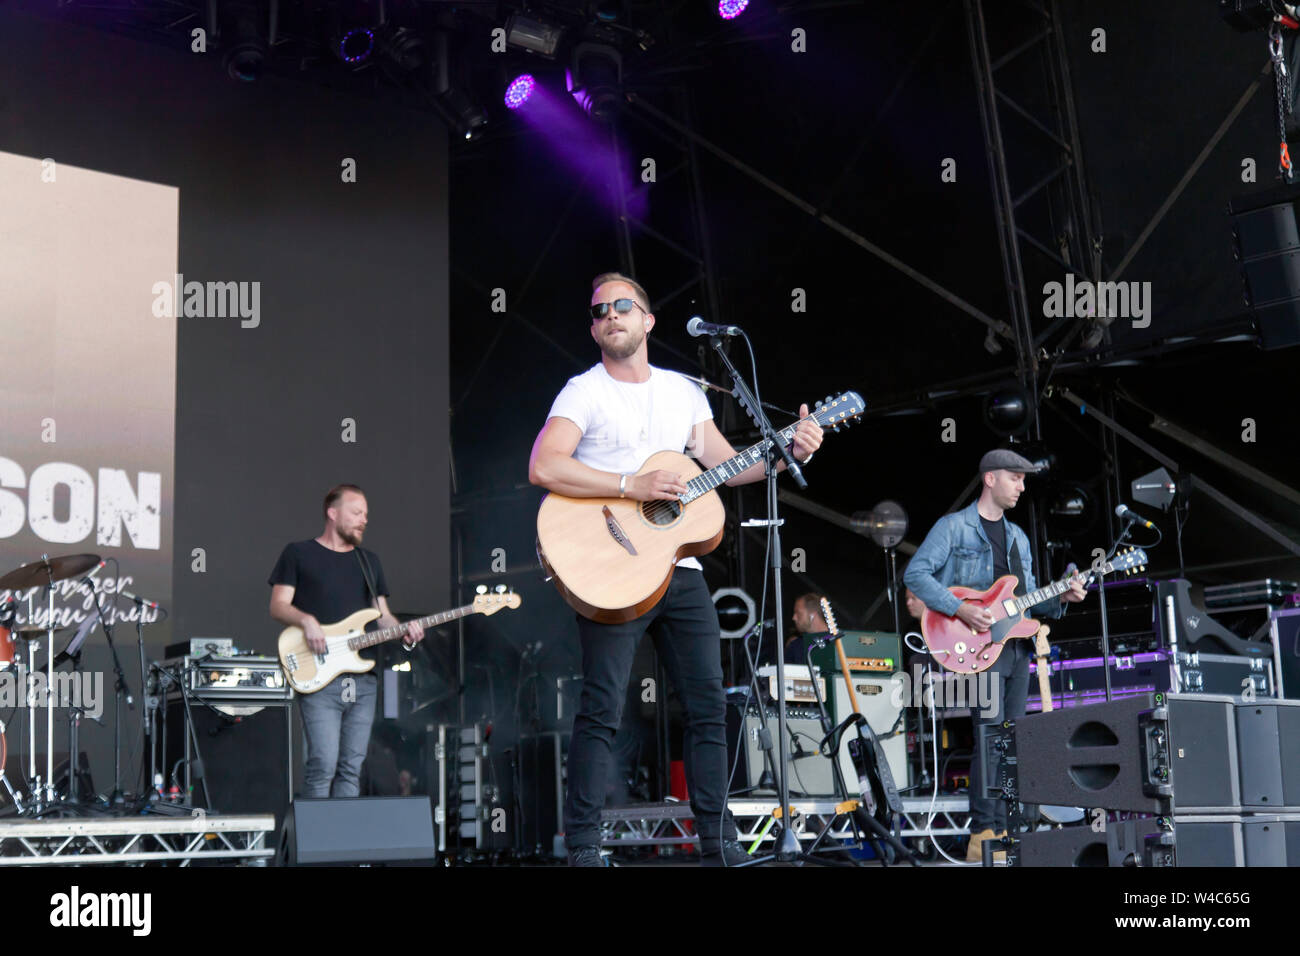 James Morrison performing on the Main Stage on Day 1 of the OnBlackheath Music Festival 2019 Stock Photo